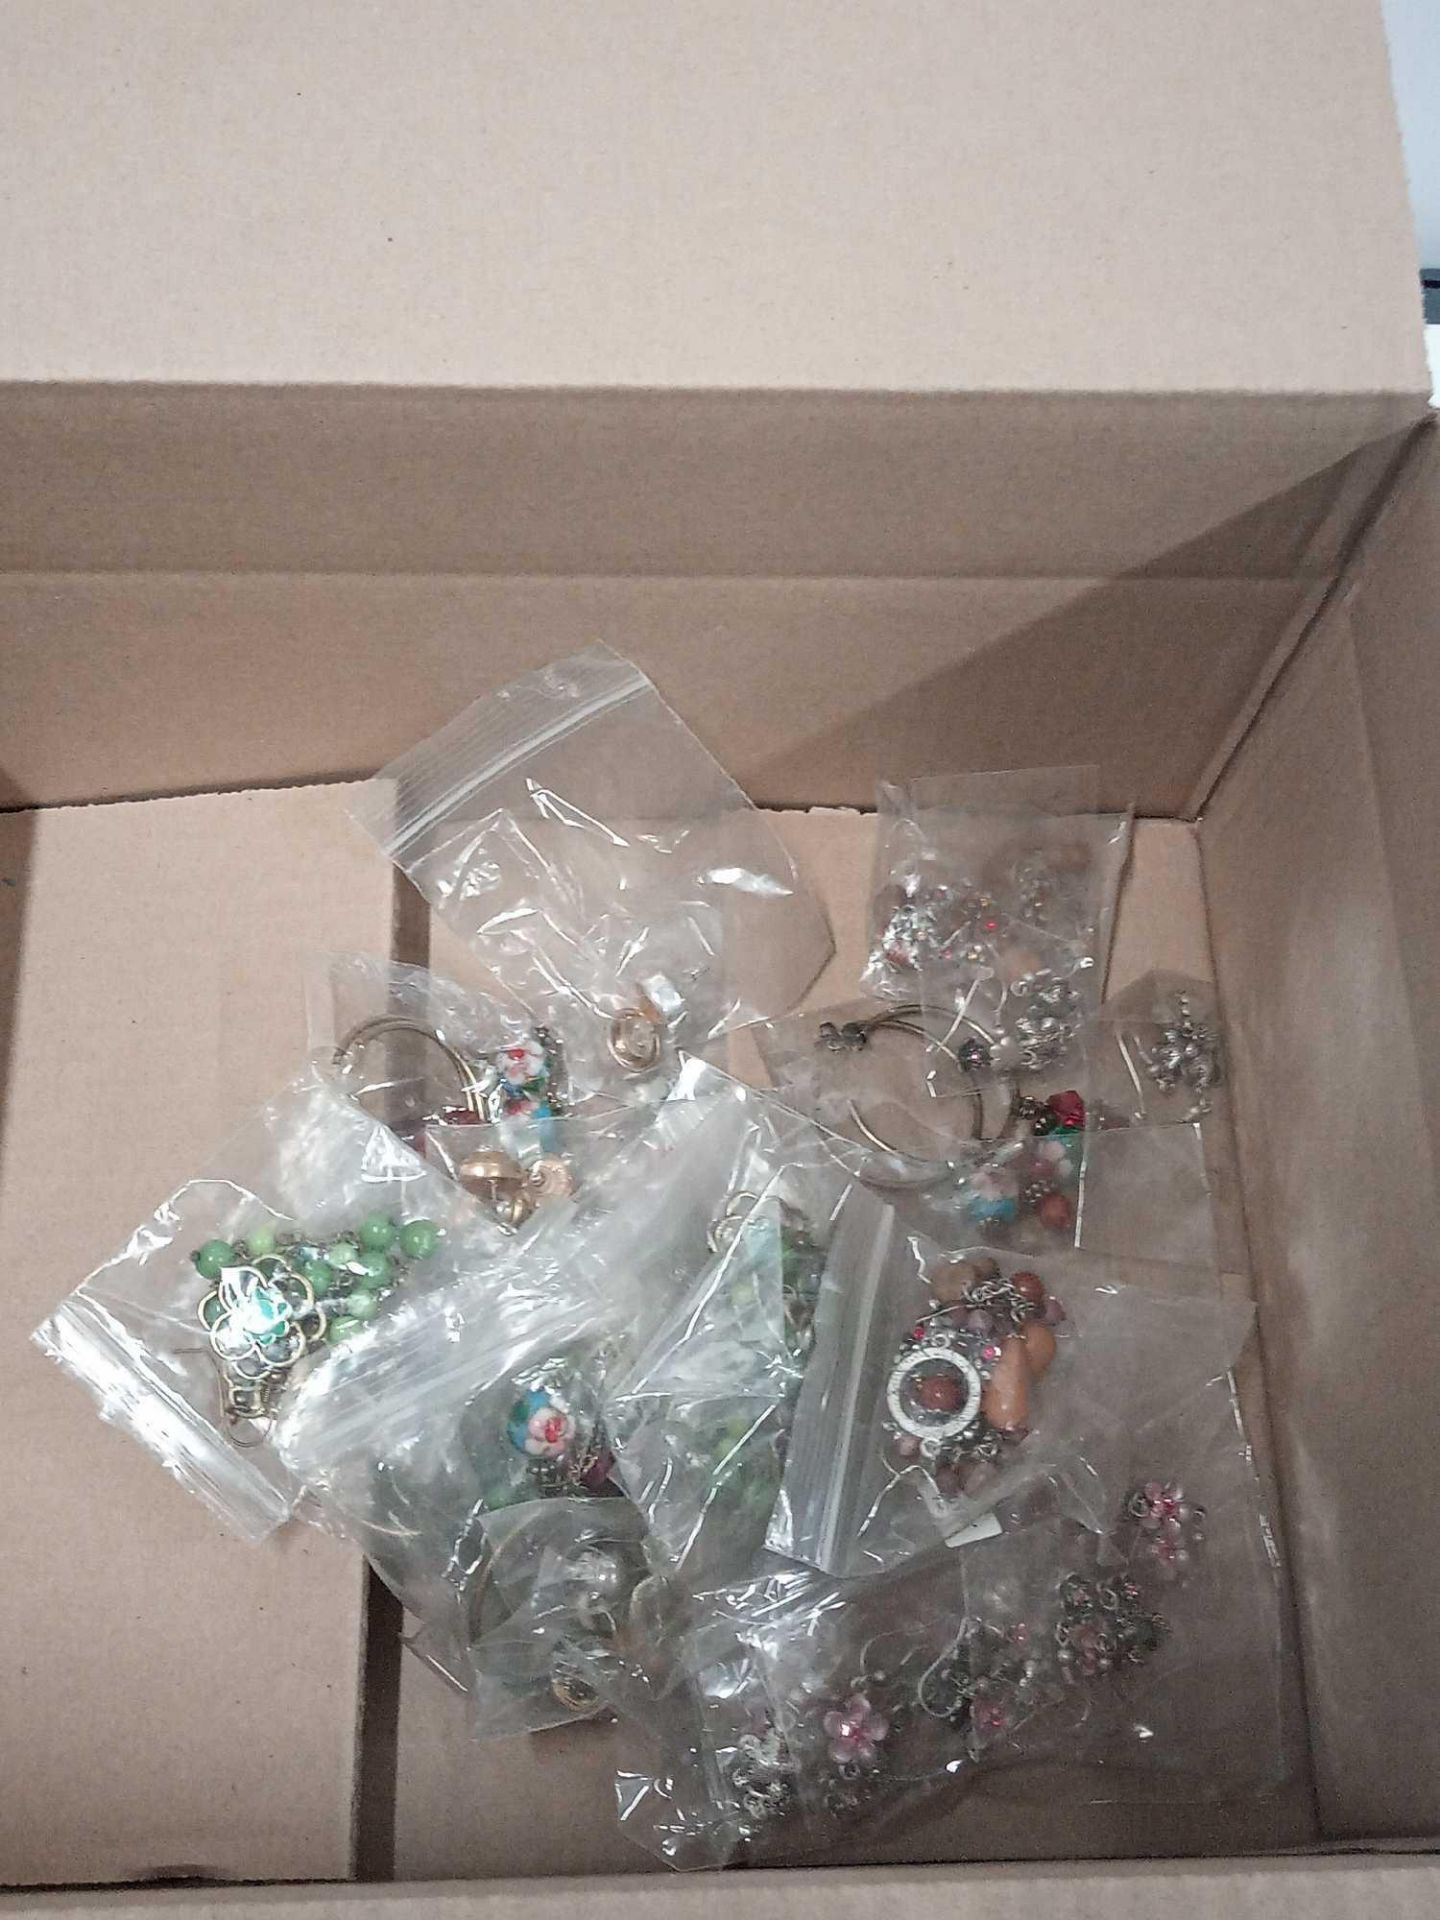 RRP £200 Box To Contain 30 Brand New Bagged And Sealed Pairs Of Ladies Designer Costume Earrings In